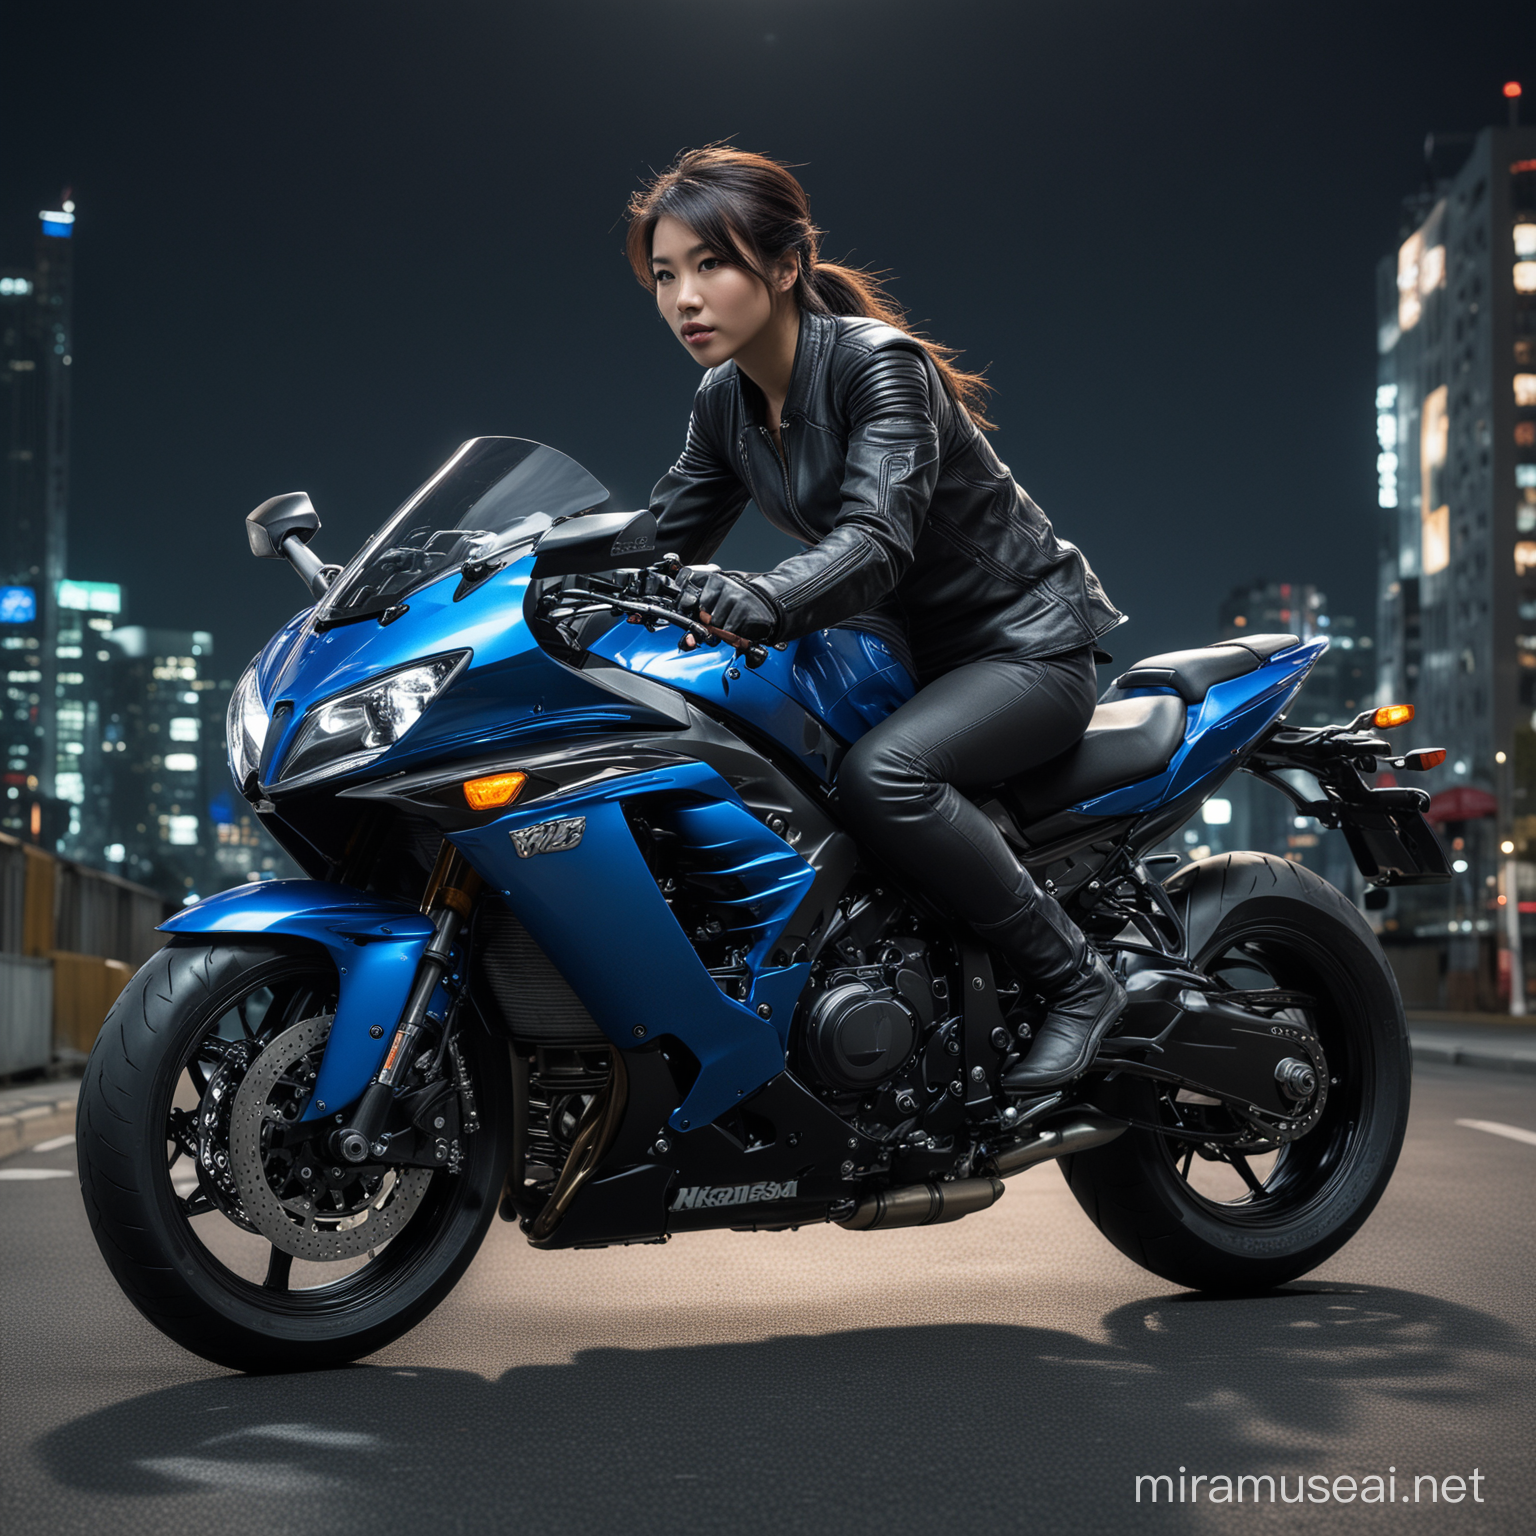 Creates a realistic image of a beautiful Asian sitting on a sleek blue Kawasaki Ninja 1000RR sports motorcycle at night. Individuals wear black leather jackets, adding to the urban and modern aesthetics of the landscape. The bright blue color of the motorcycle stands out against a dark background. Ambient city lights illuminate the surroundings, creating a contrast of light and shadow, 800mm lens, realistic, hyperrealistic, photography, professional photography, immersive photography, ultra HD, ultra high quality, top quality, medium quality, HDR photo, focus focus, deep focus, very detailed, original photo, original photo, very sharp, nature photo, masterpiece, award winning, shot with Hasselblad X2D